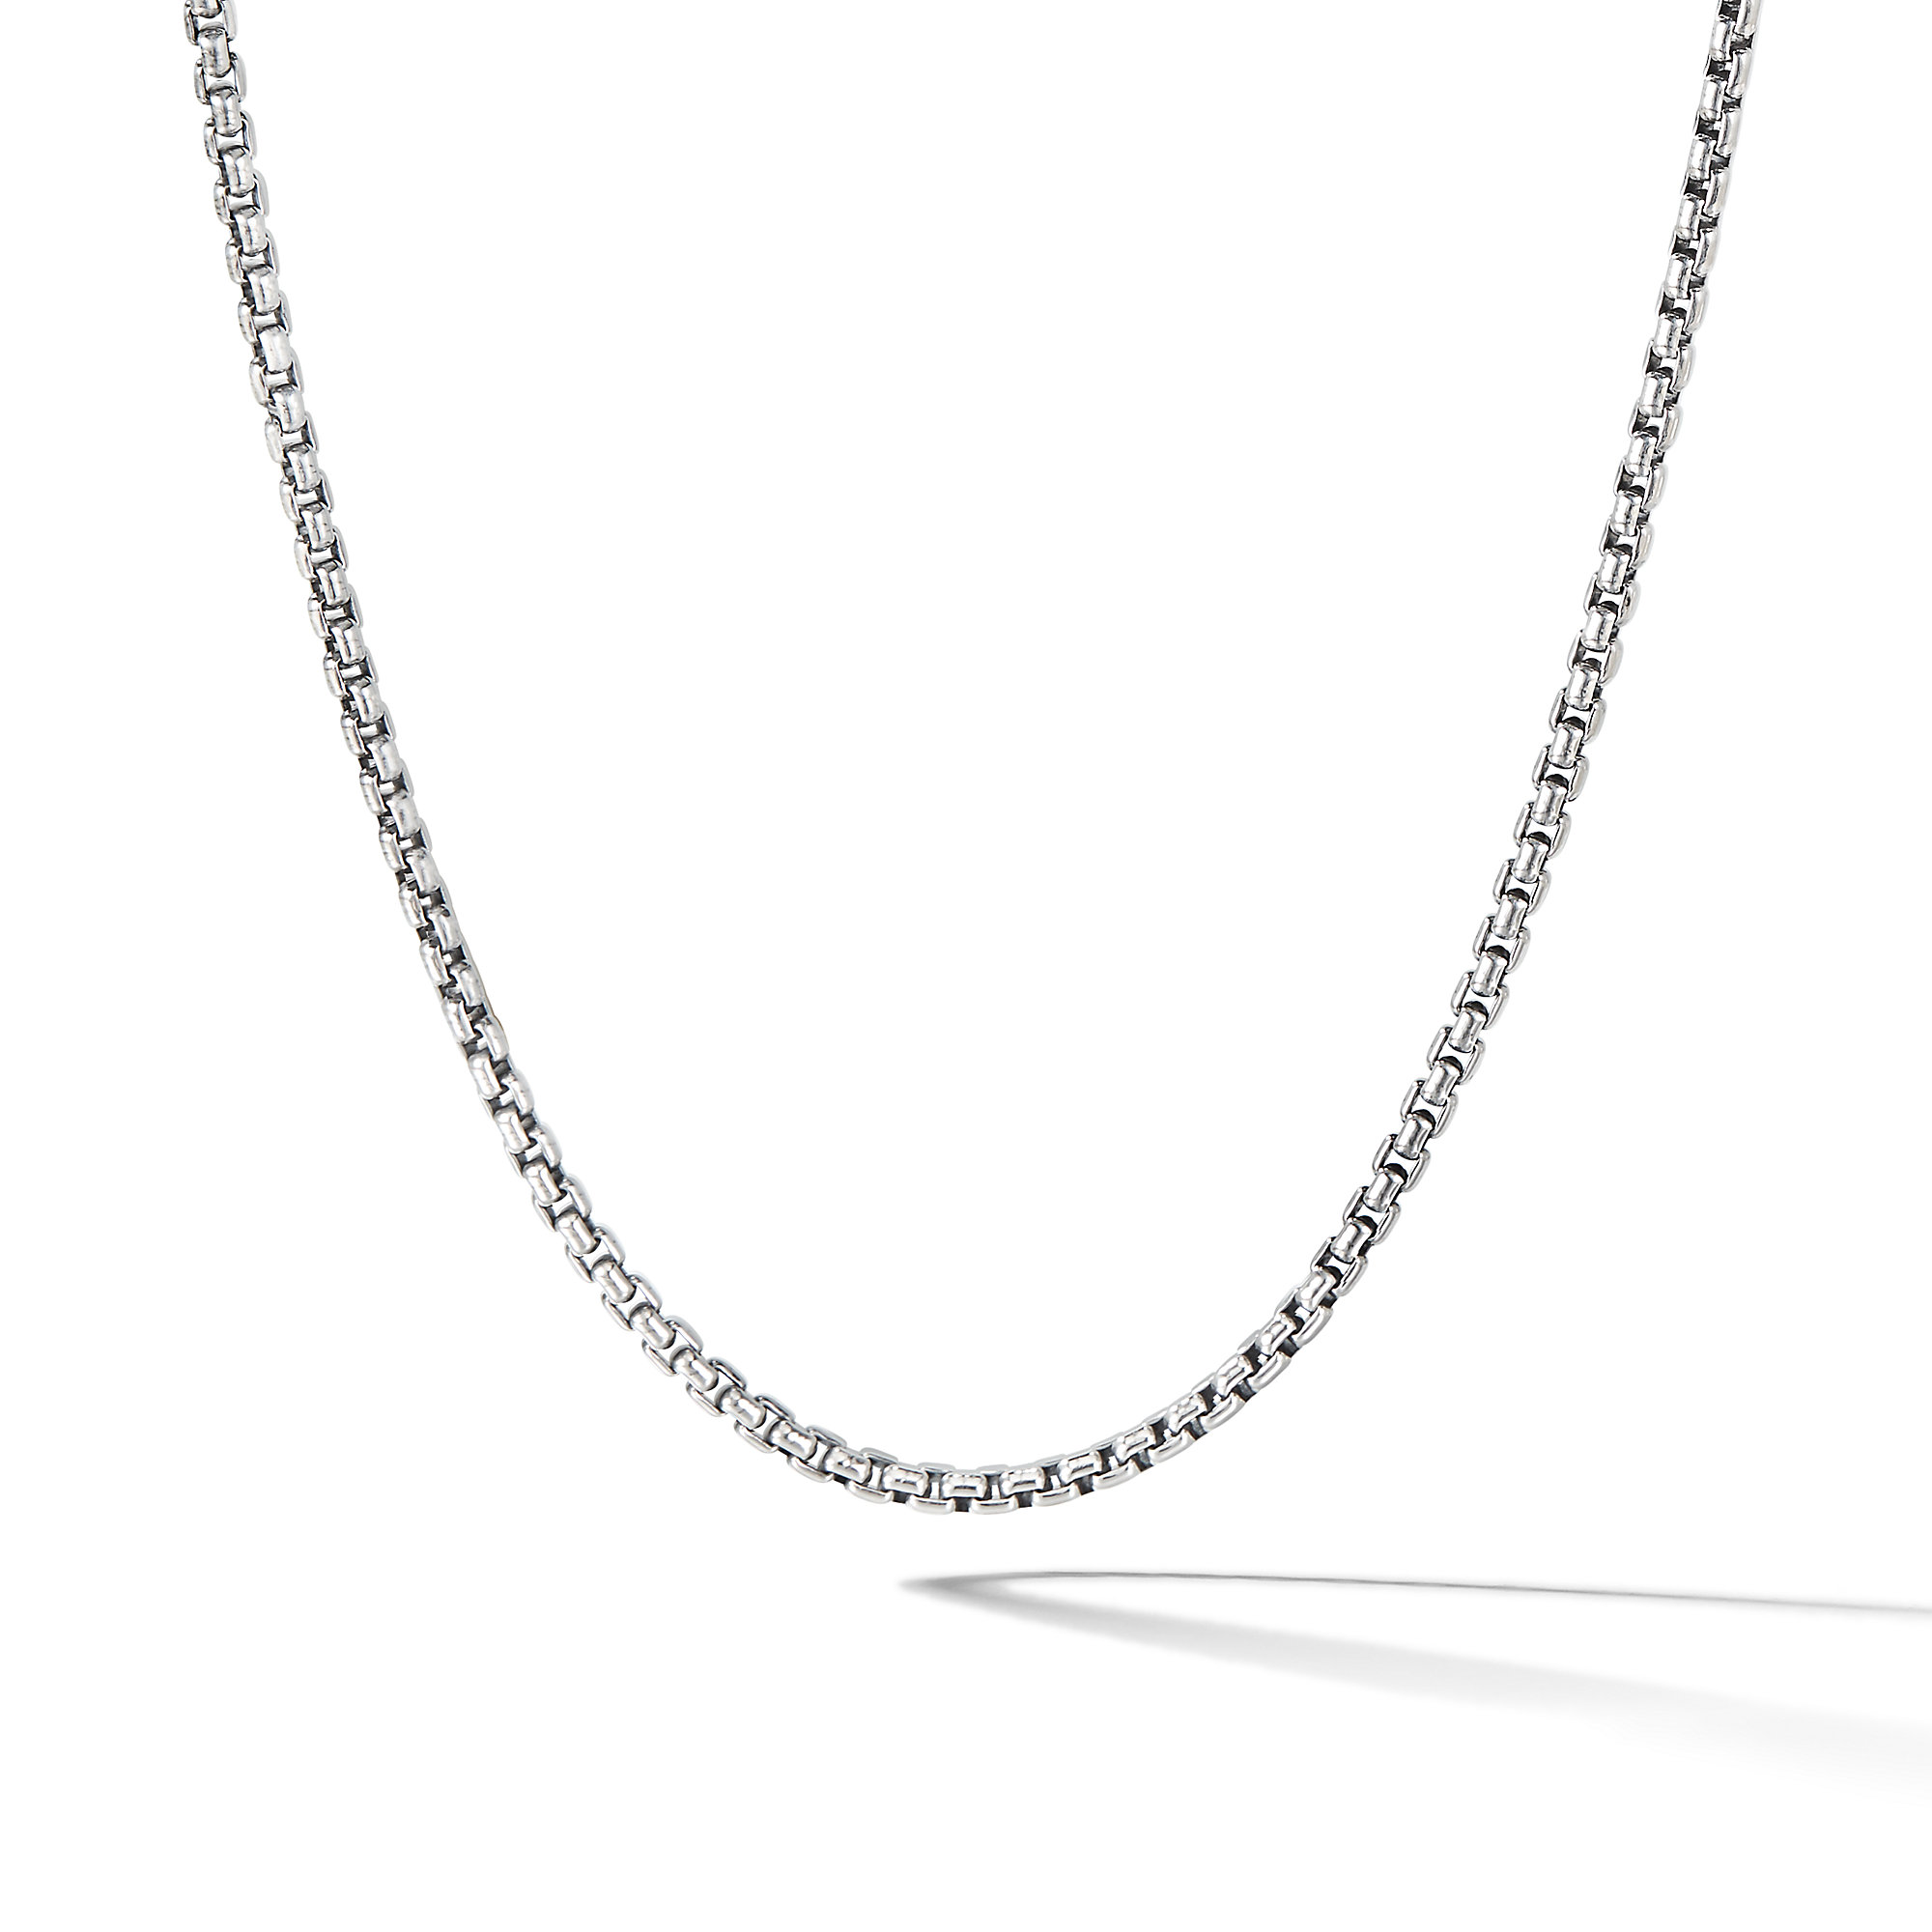 Box Chain Slider Necklace in Sterling Silver, 2.7mm